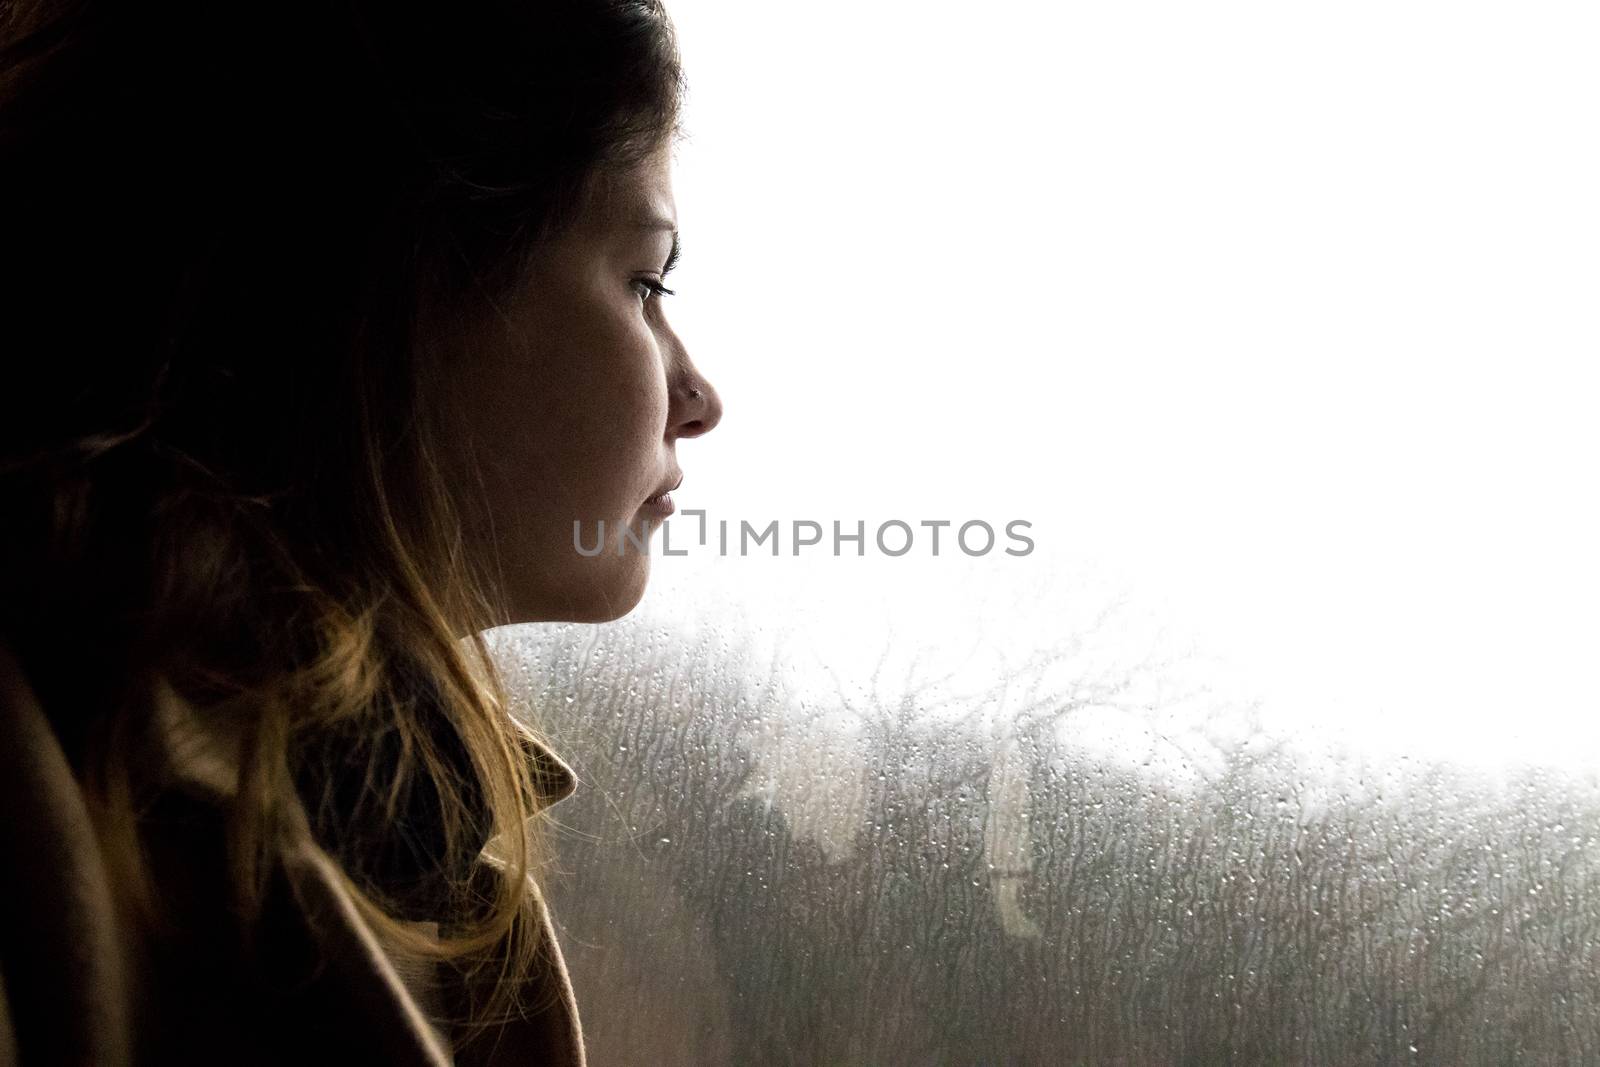 Beautifull girl looking at the bus window while is raining outside. 